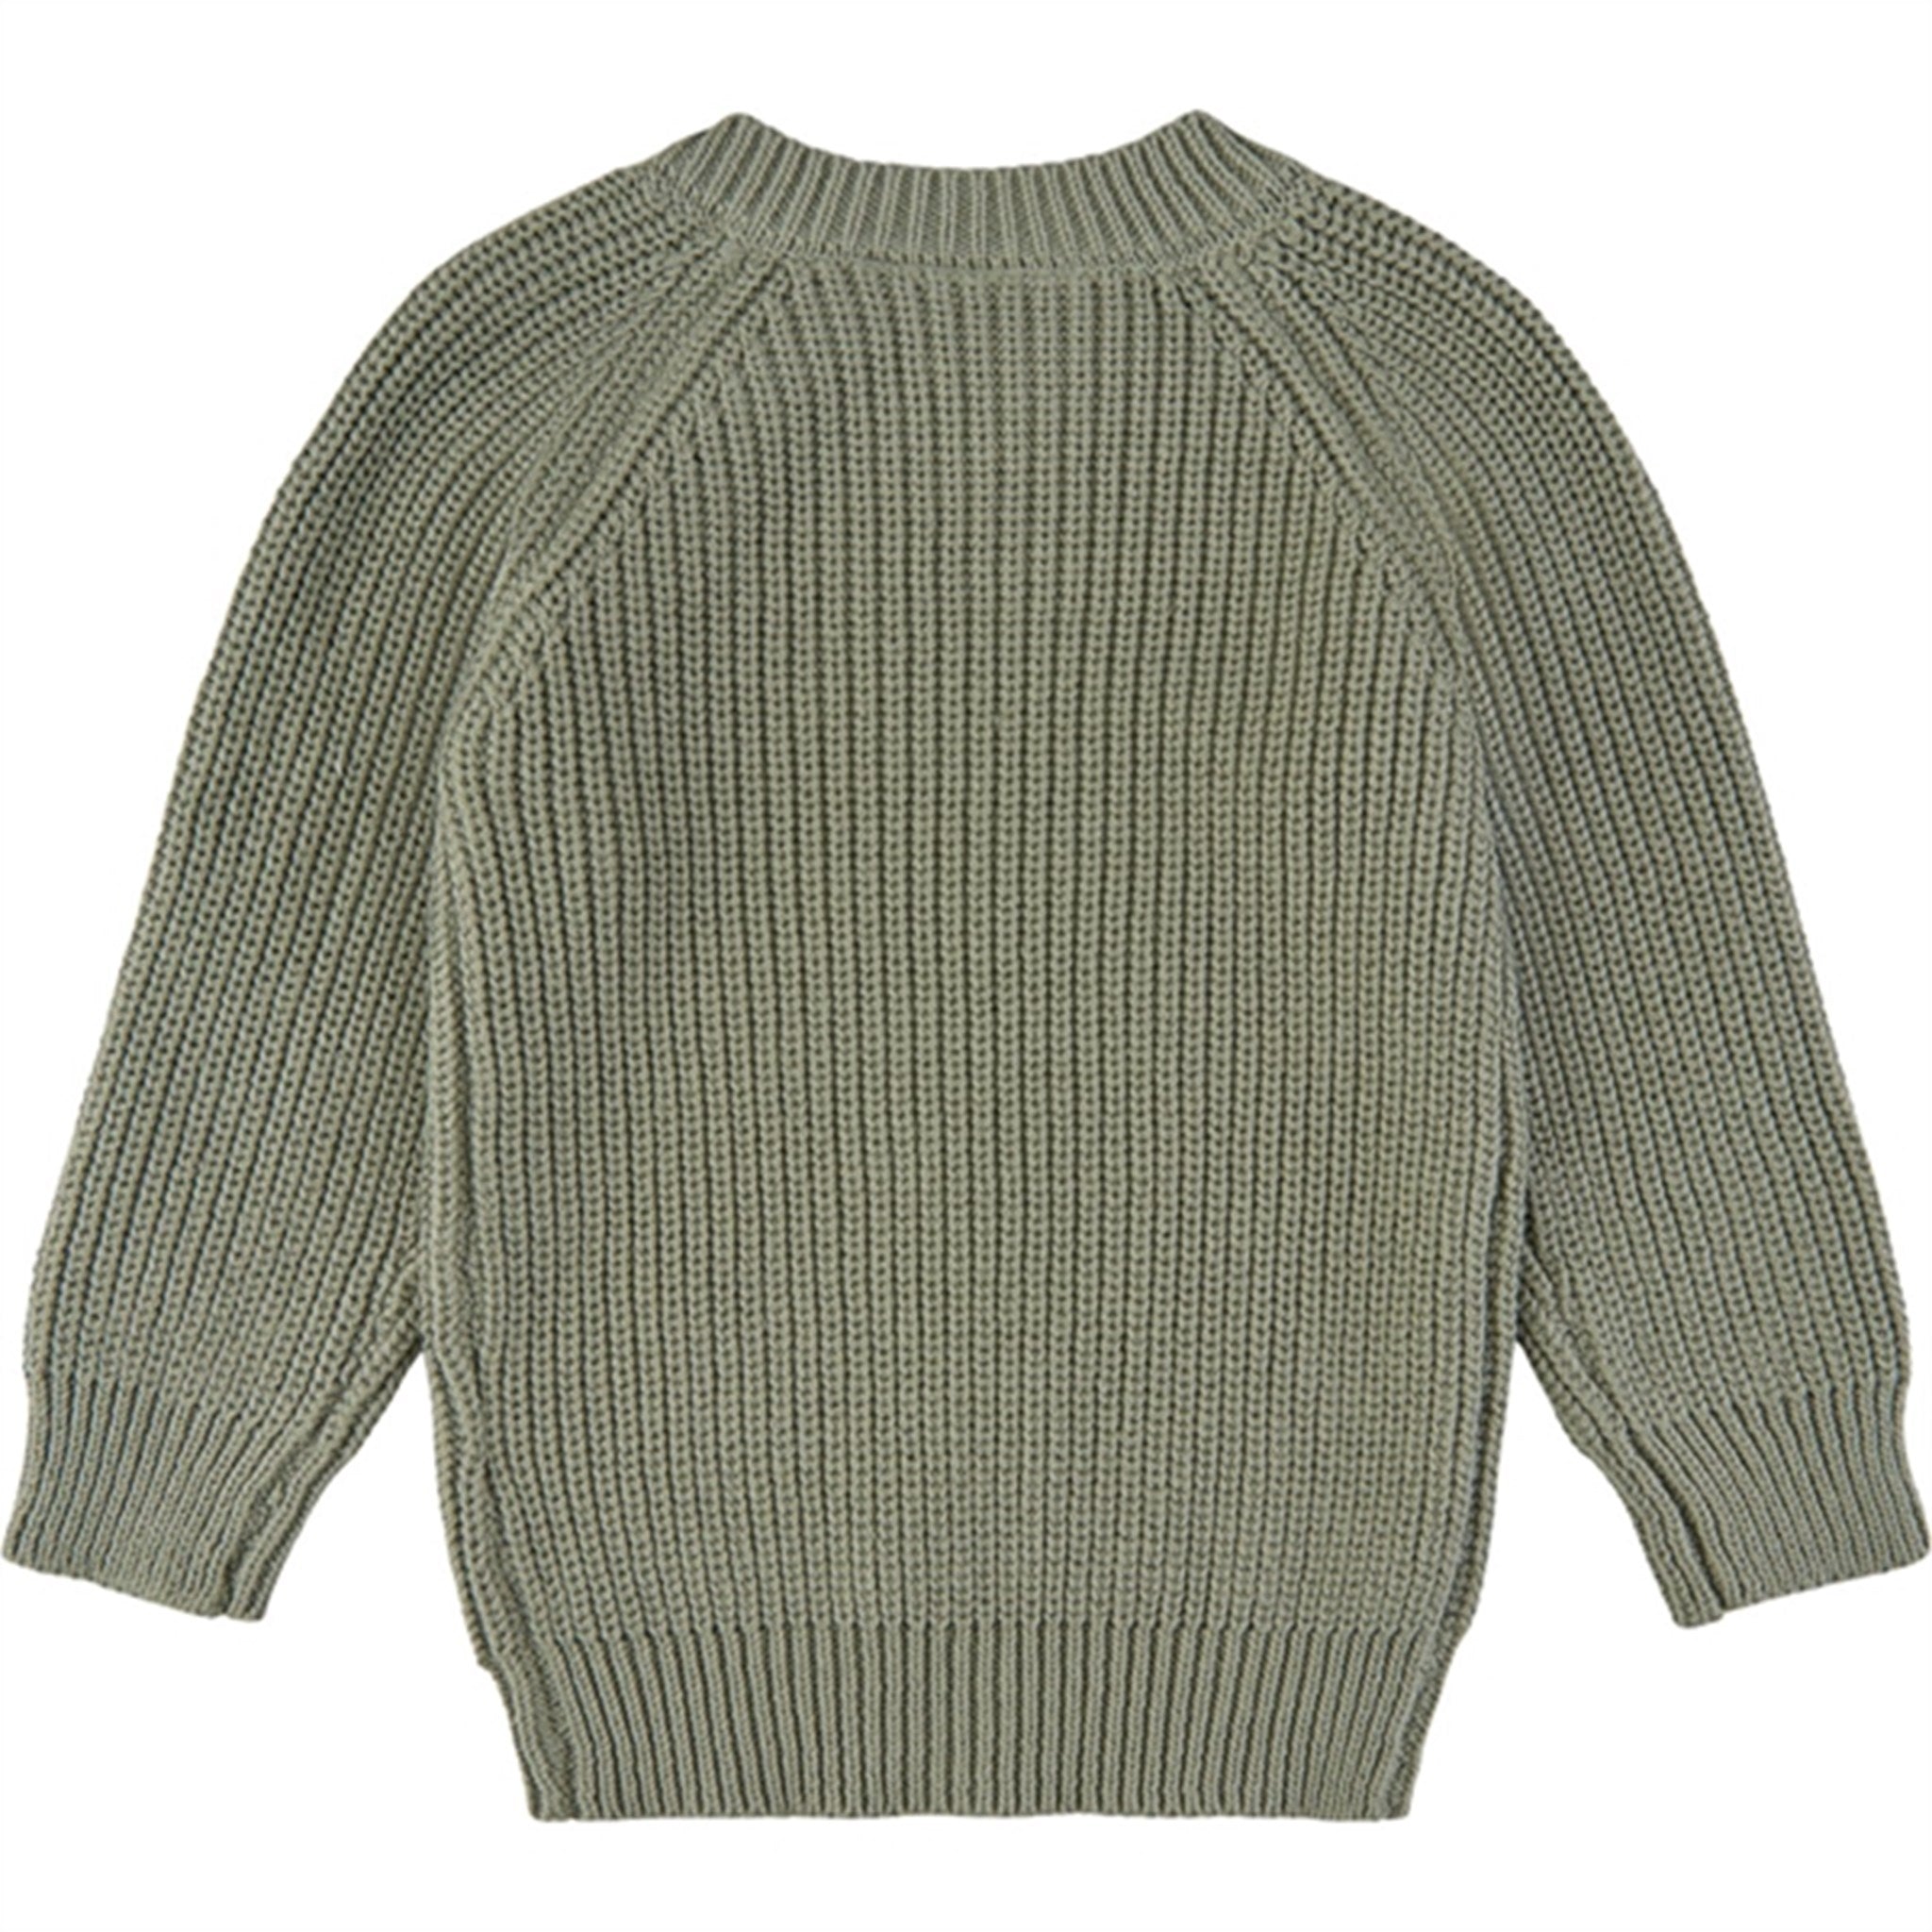 THE NEW Siblings Seagrass Elfred Pullover 2